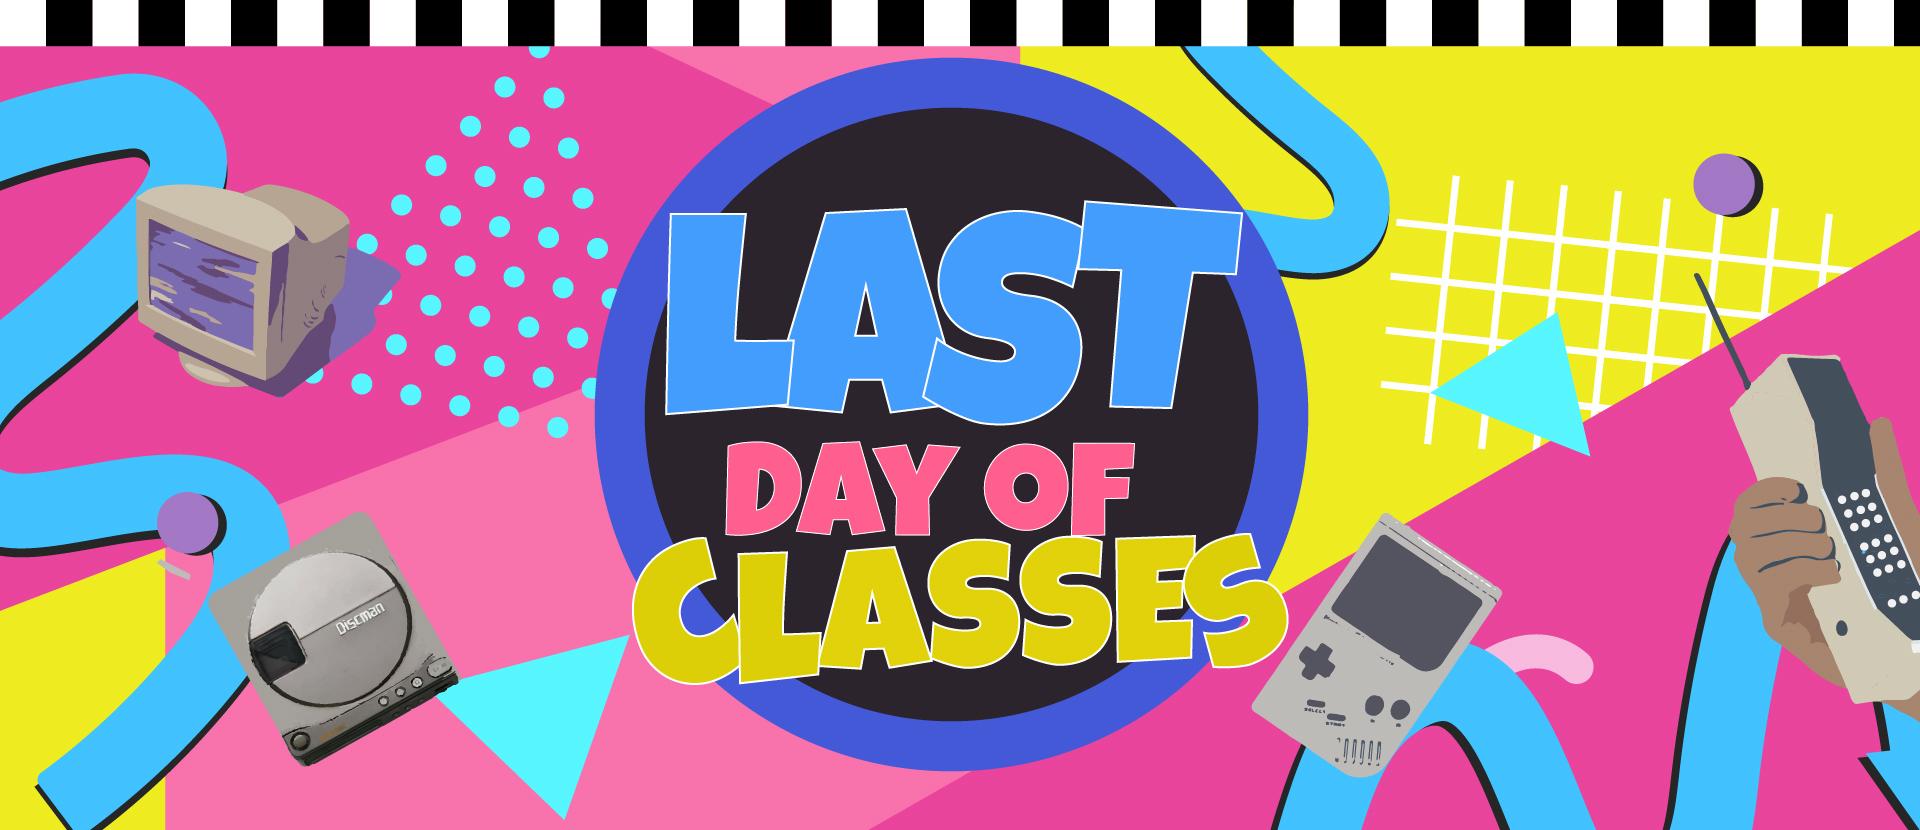 Last day of classes graphic